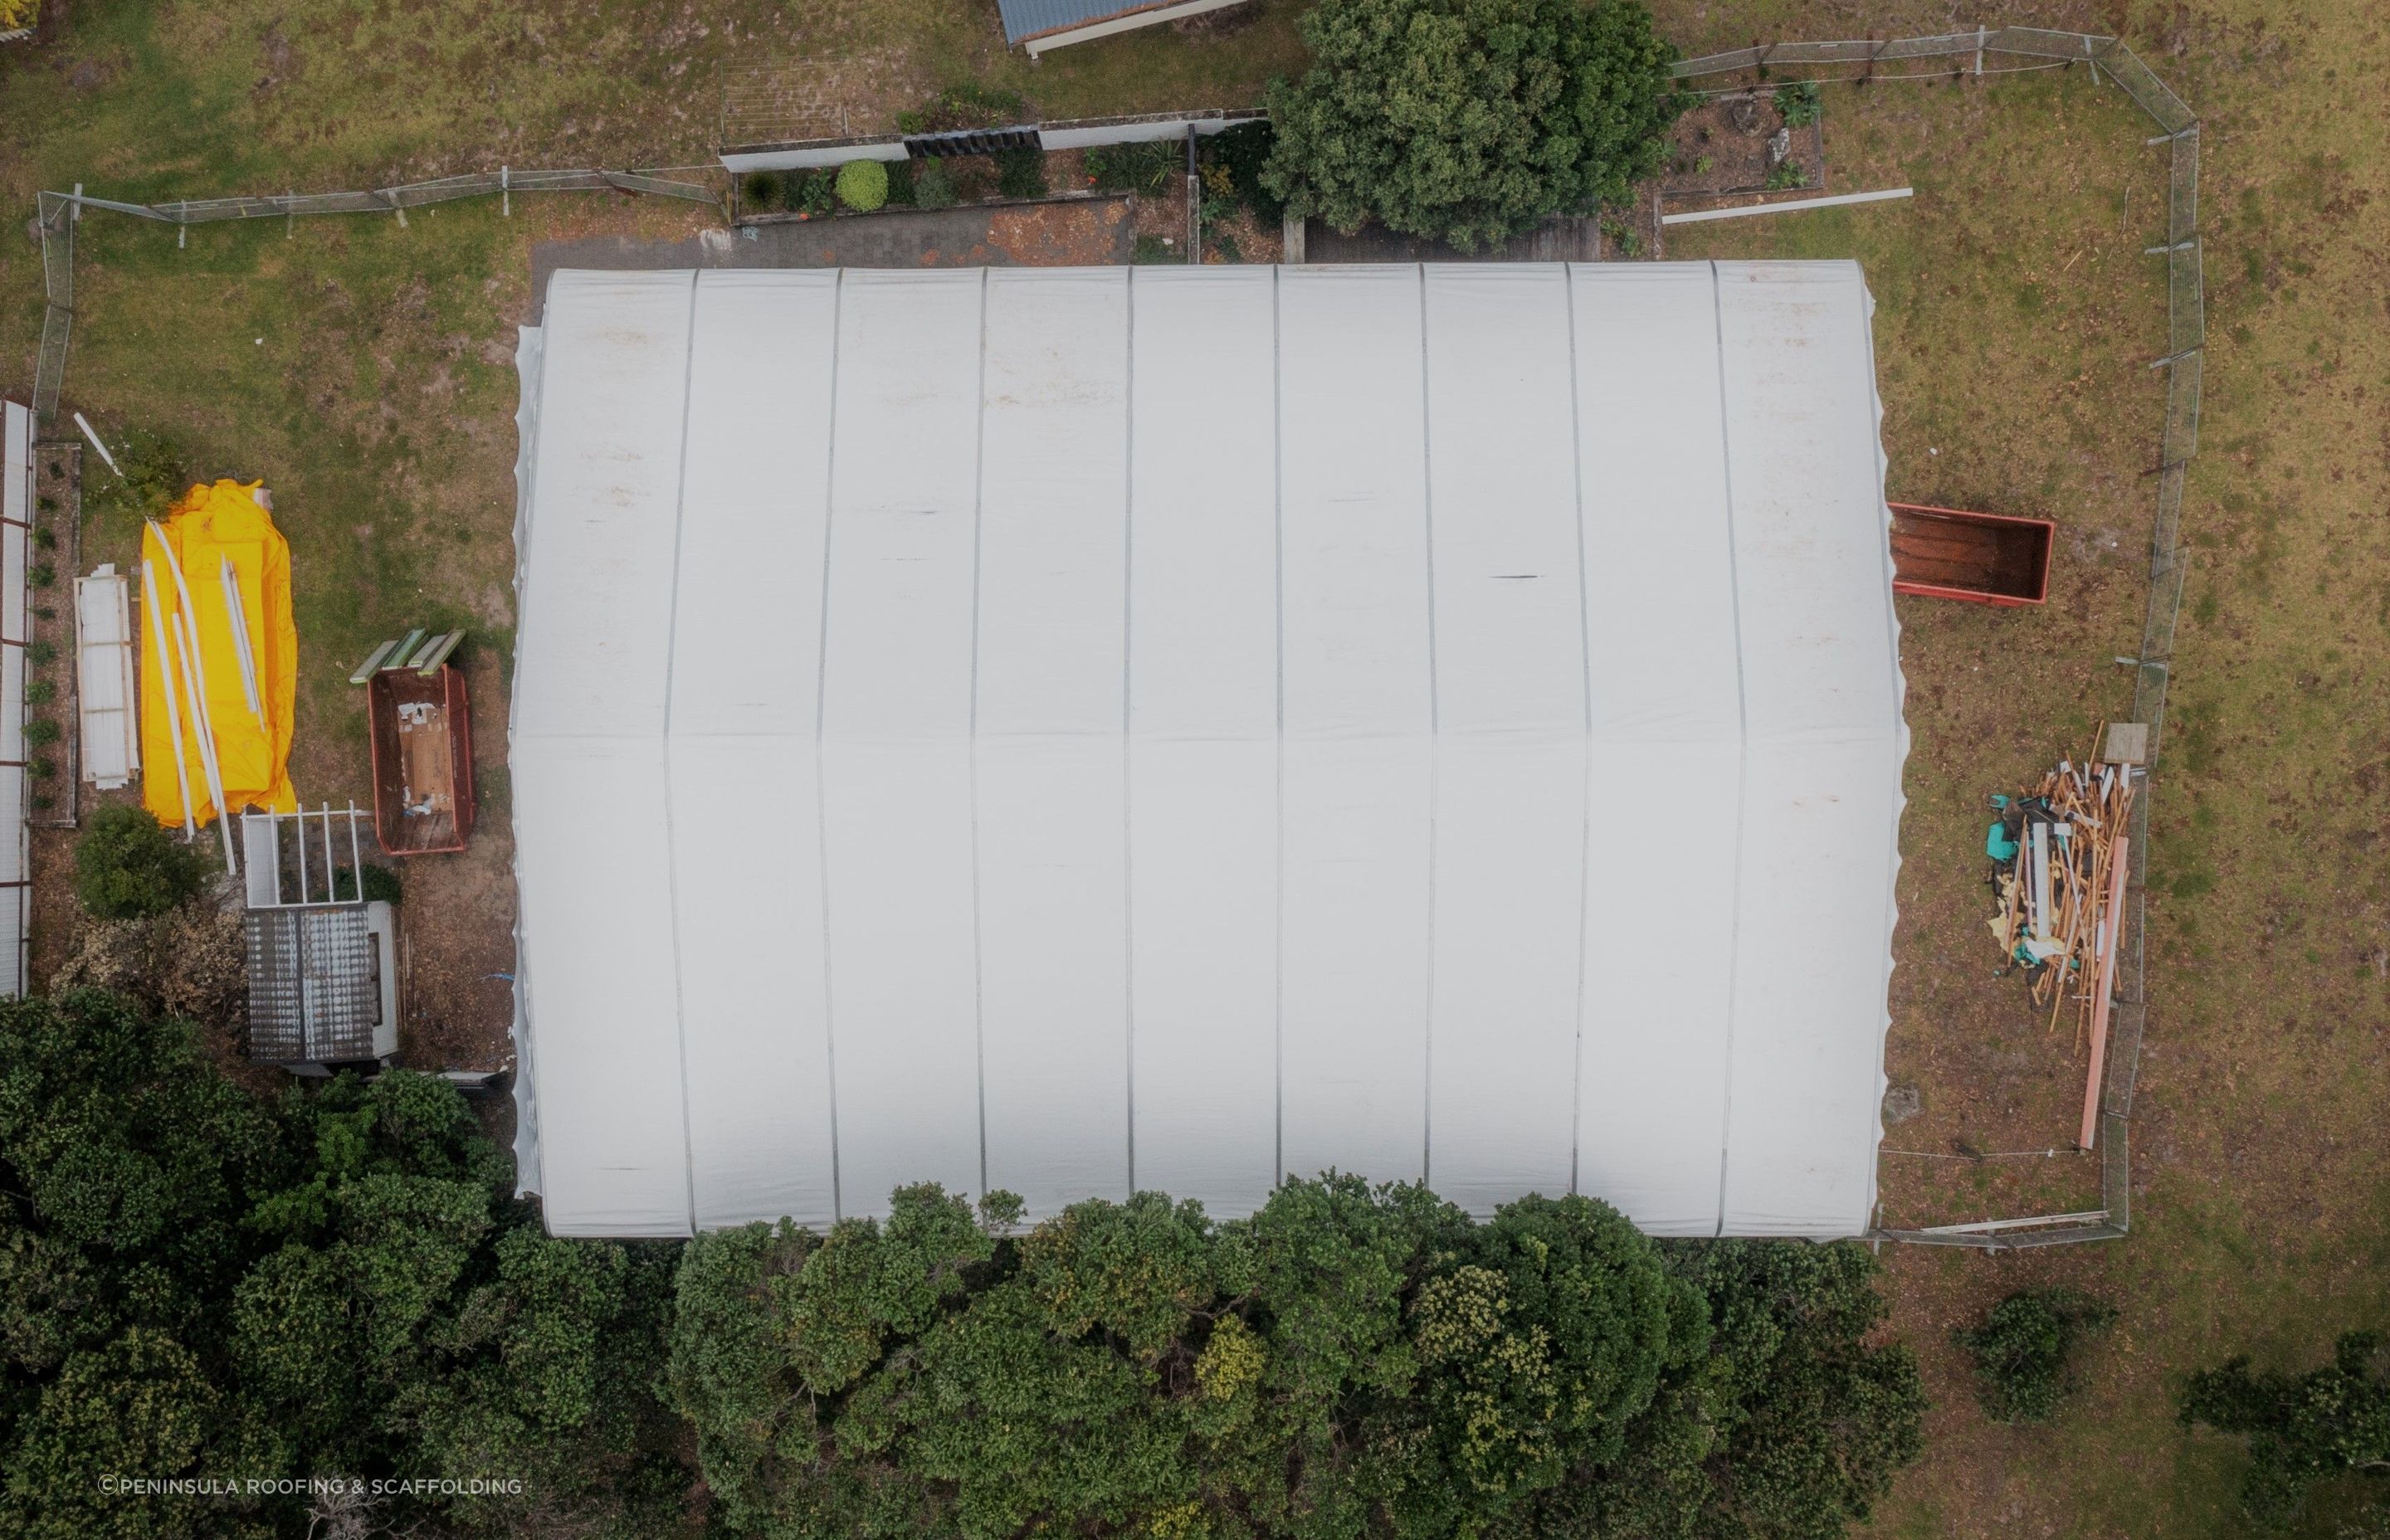 PVC sheet tarpaulins are fed into the supporting structure. They are re-usable!